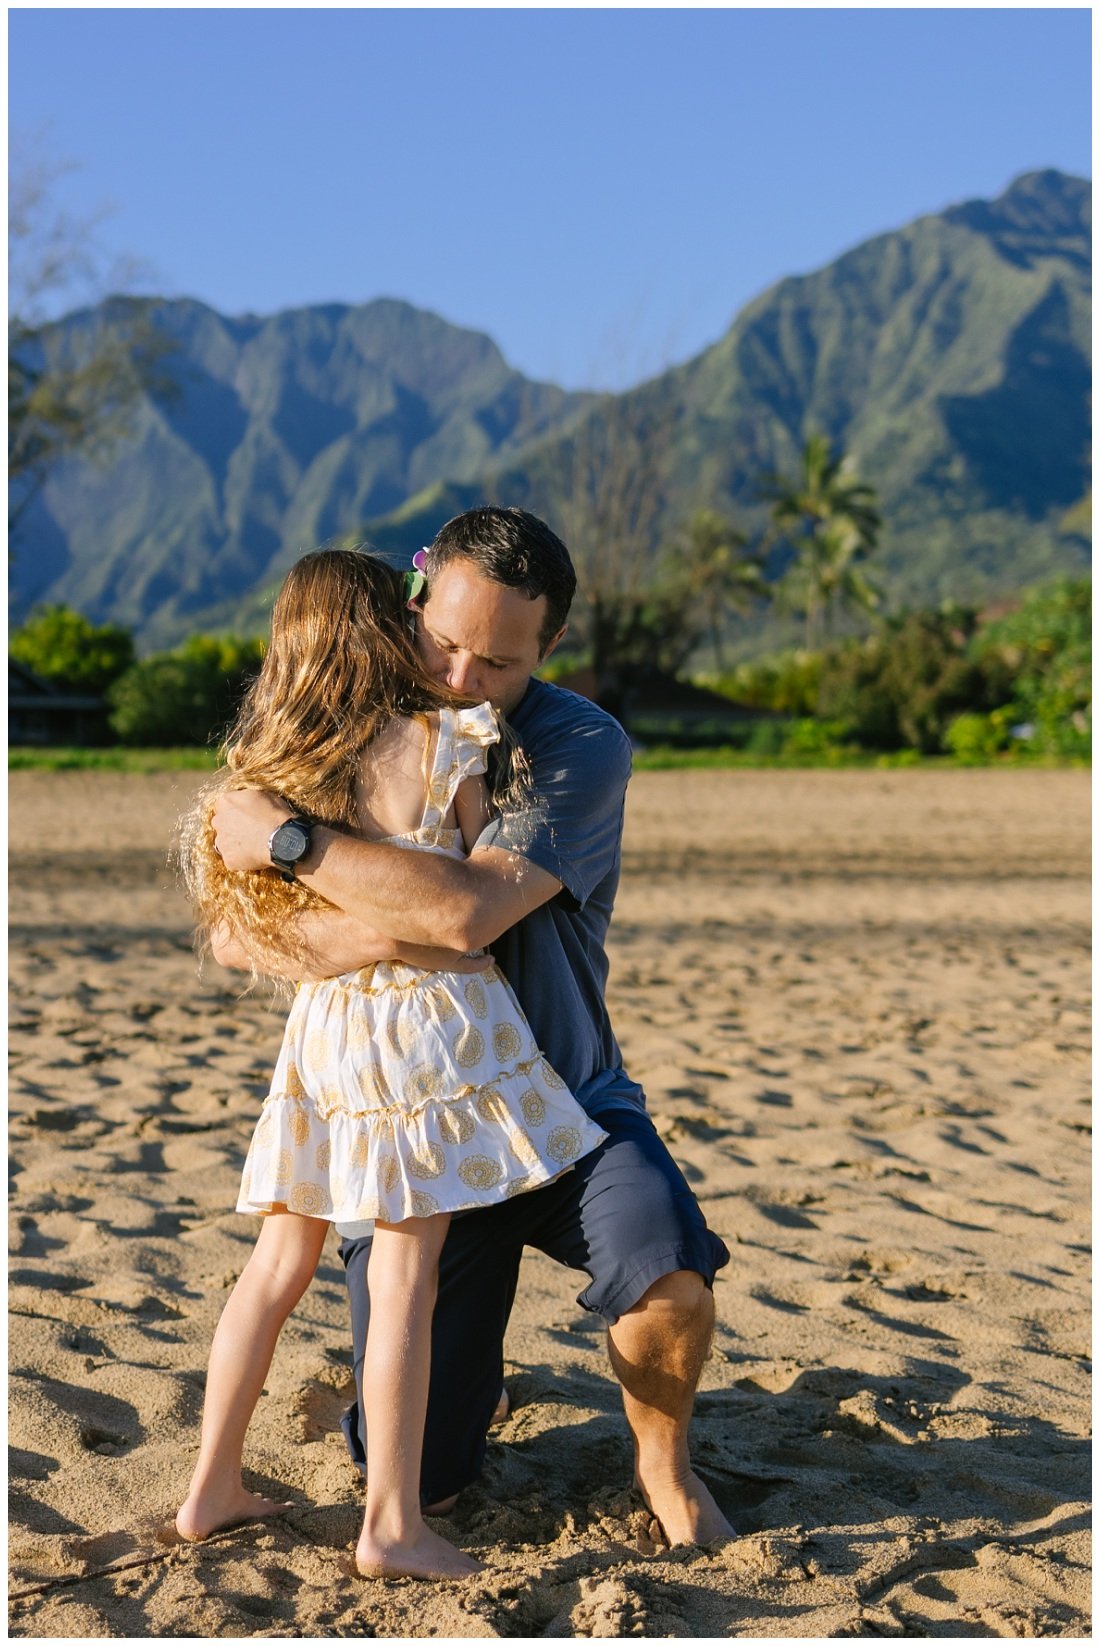 dad hugs daughter at the beach in hawaii with mountains beyond